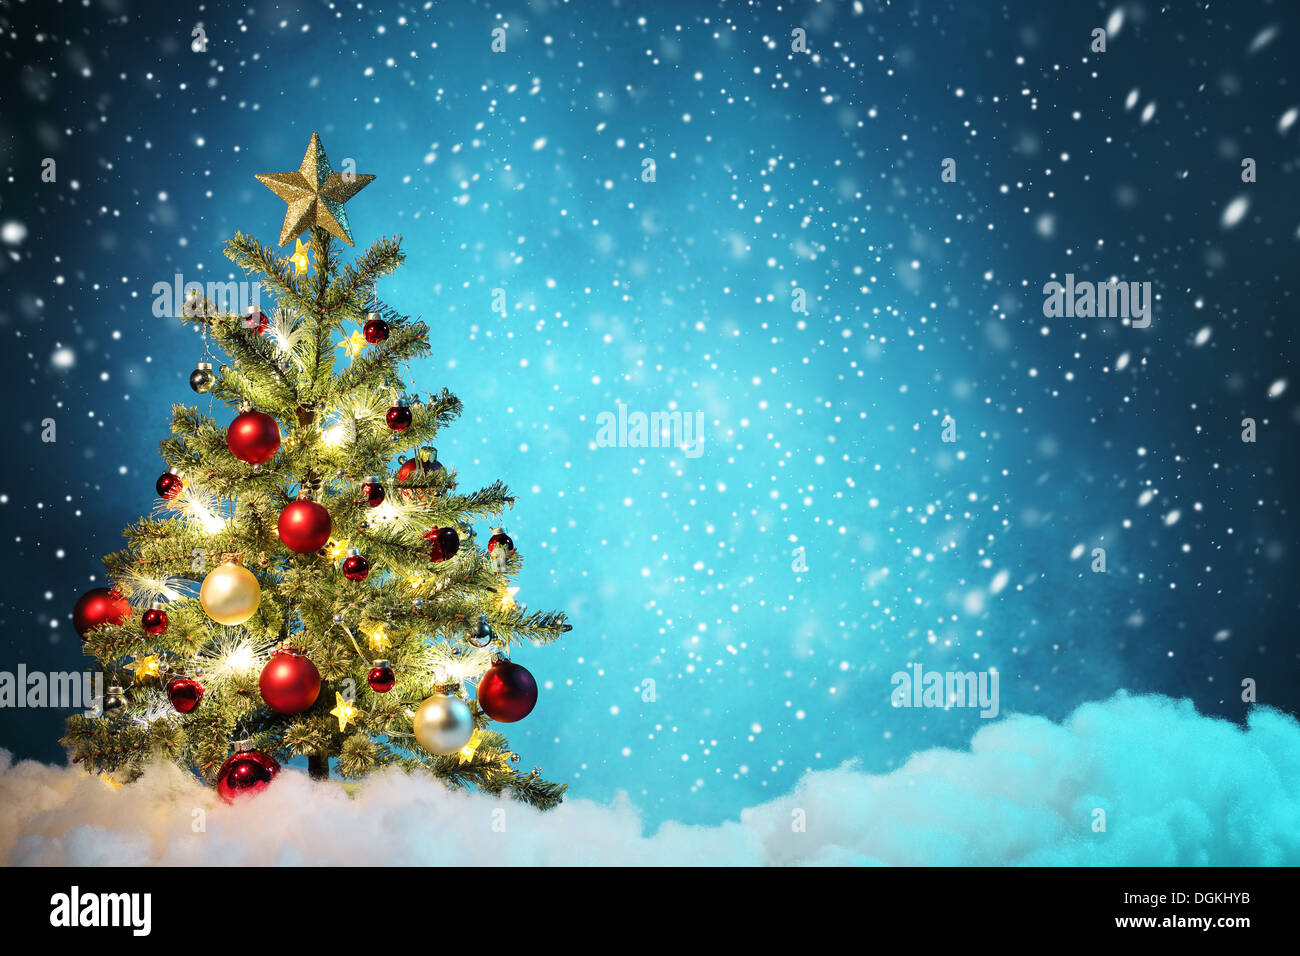 Decorated Christmas tree in snowy night,Concept. Stock Photo